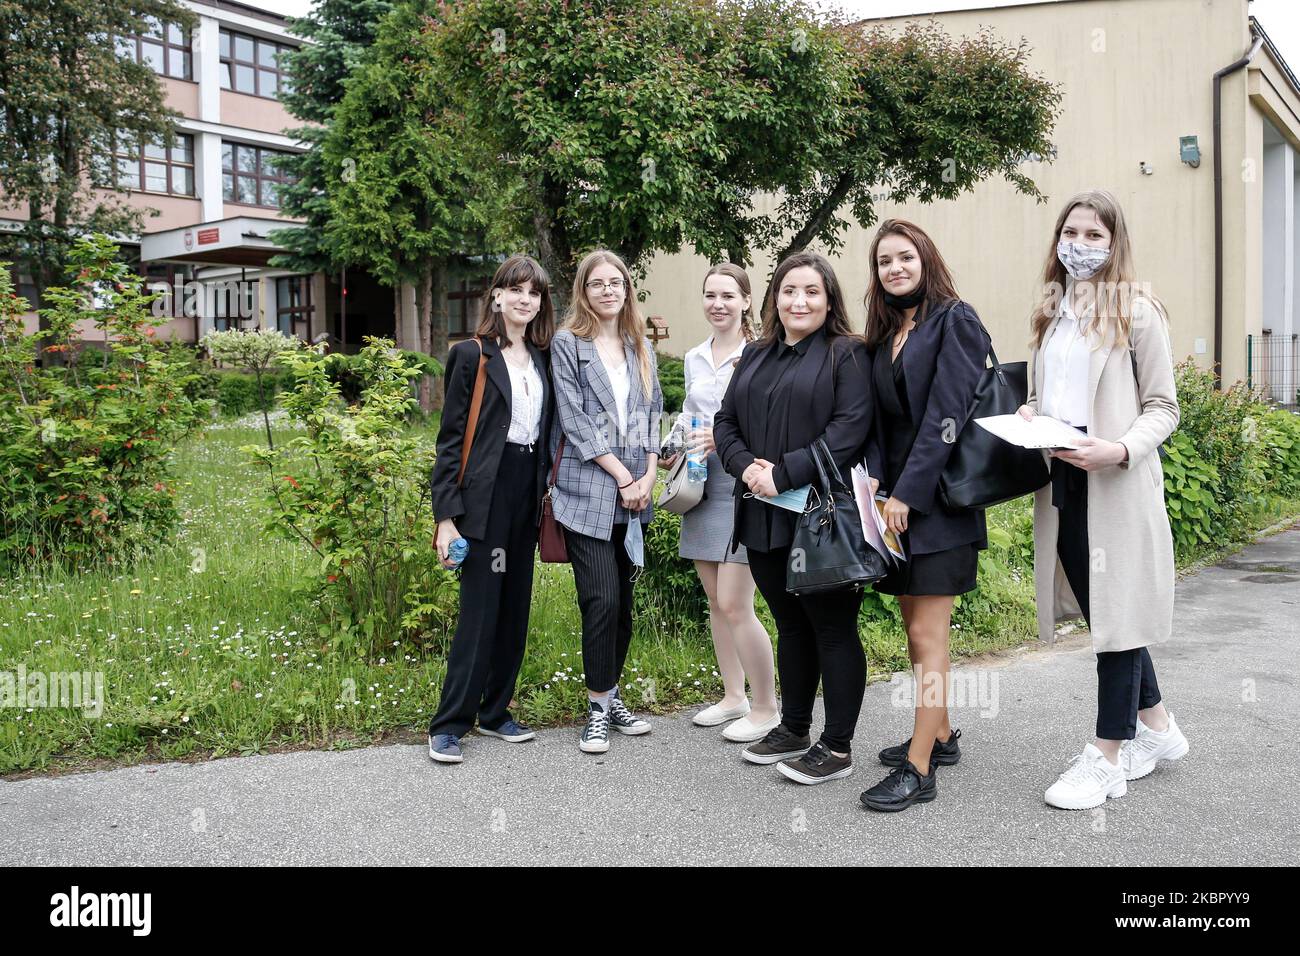 A group of young adults pose to be photographed before taking final graduation exam, called maturity exams in the First General Education High School (I Liceum Ogolnokrztalcace im. Stefana Zeromskiego) in Kielce, Poland on the June 8, 2020. It is the first day of the exams which will in total take about a month, it is the most important exam in Polsish schooling system. This year's exams take extra Coronacitus social distancing precautions. The 2020 graduates are particularly disadvantaged as schools were closed for three months and they had to prepare at home. (Photo by Dominika Zarzycka/NurP Stock Photo